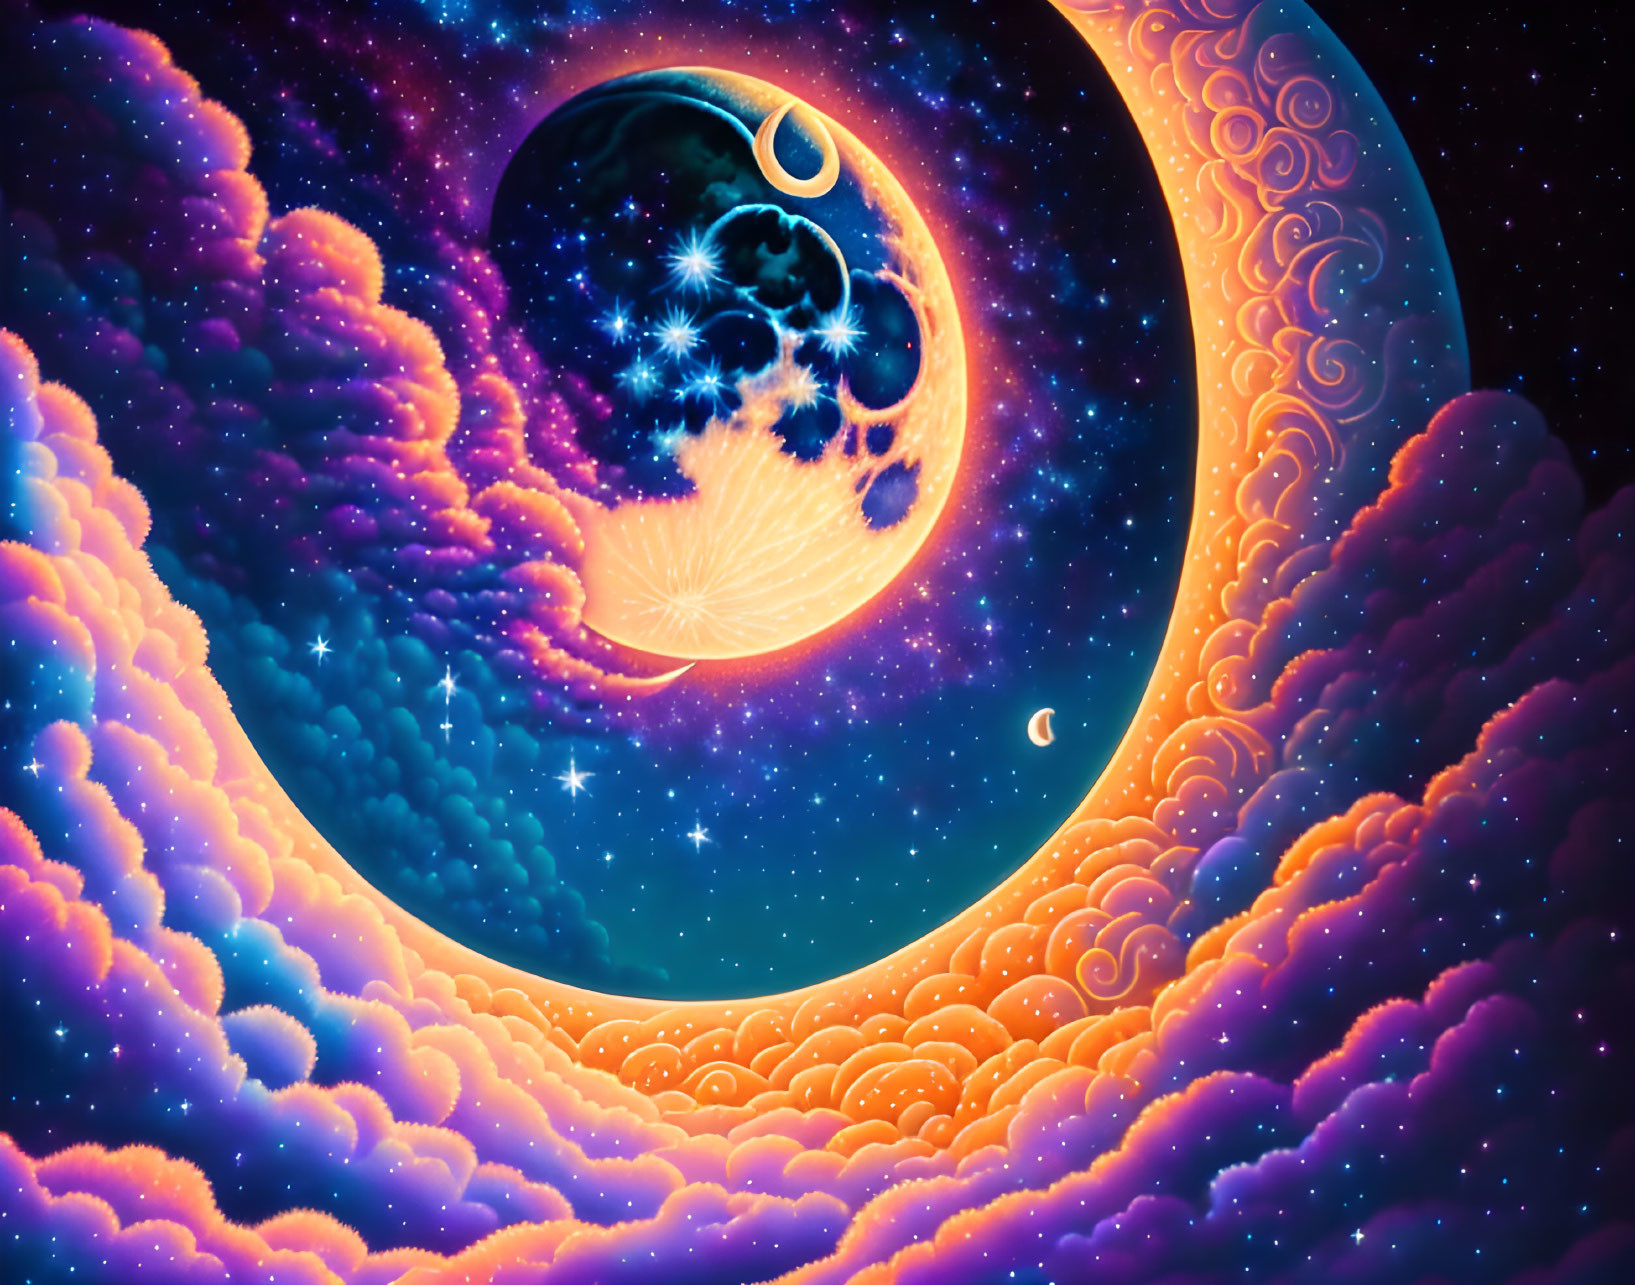 Colorful Digital Artwork: Crescent Moon with Cosmic Elements